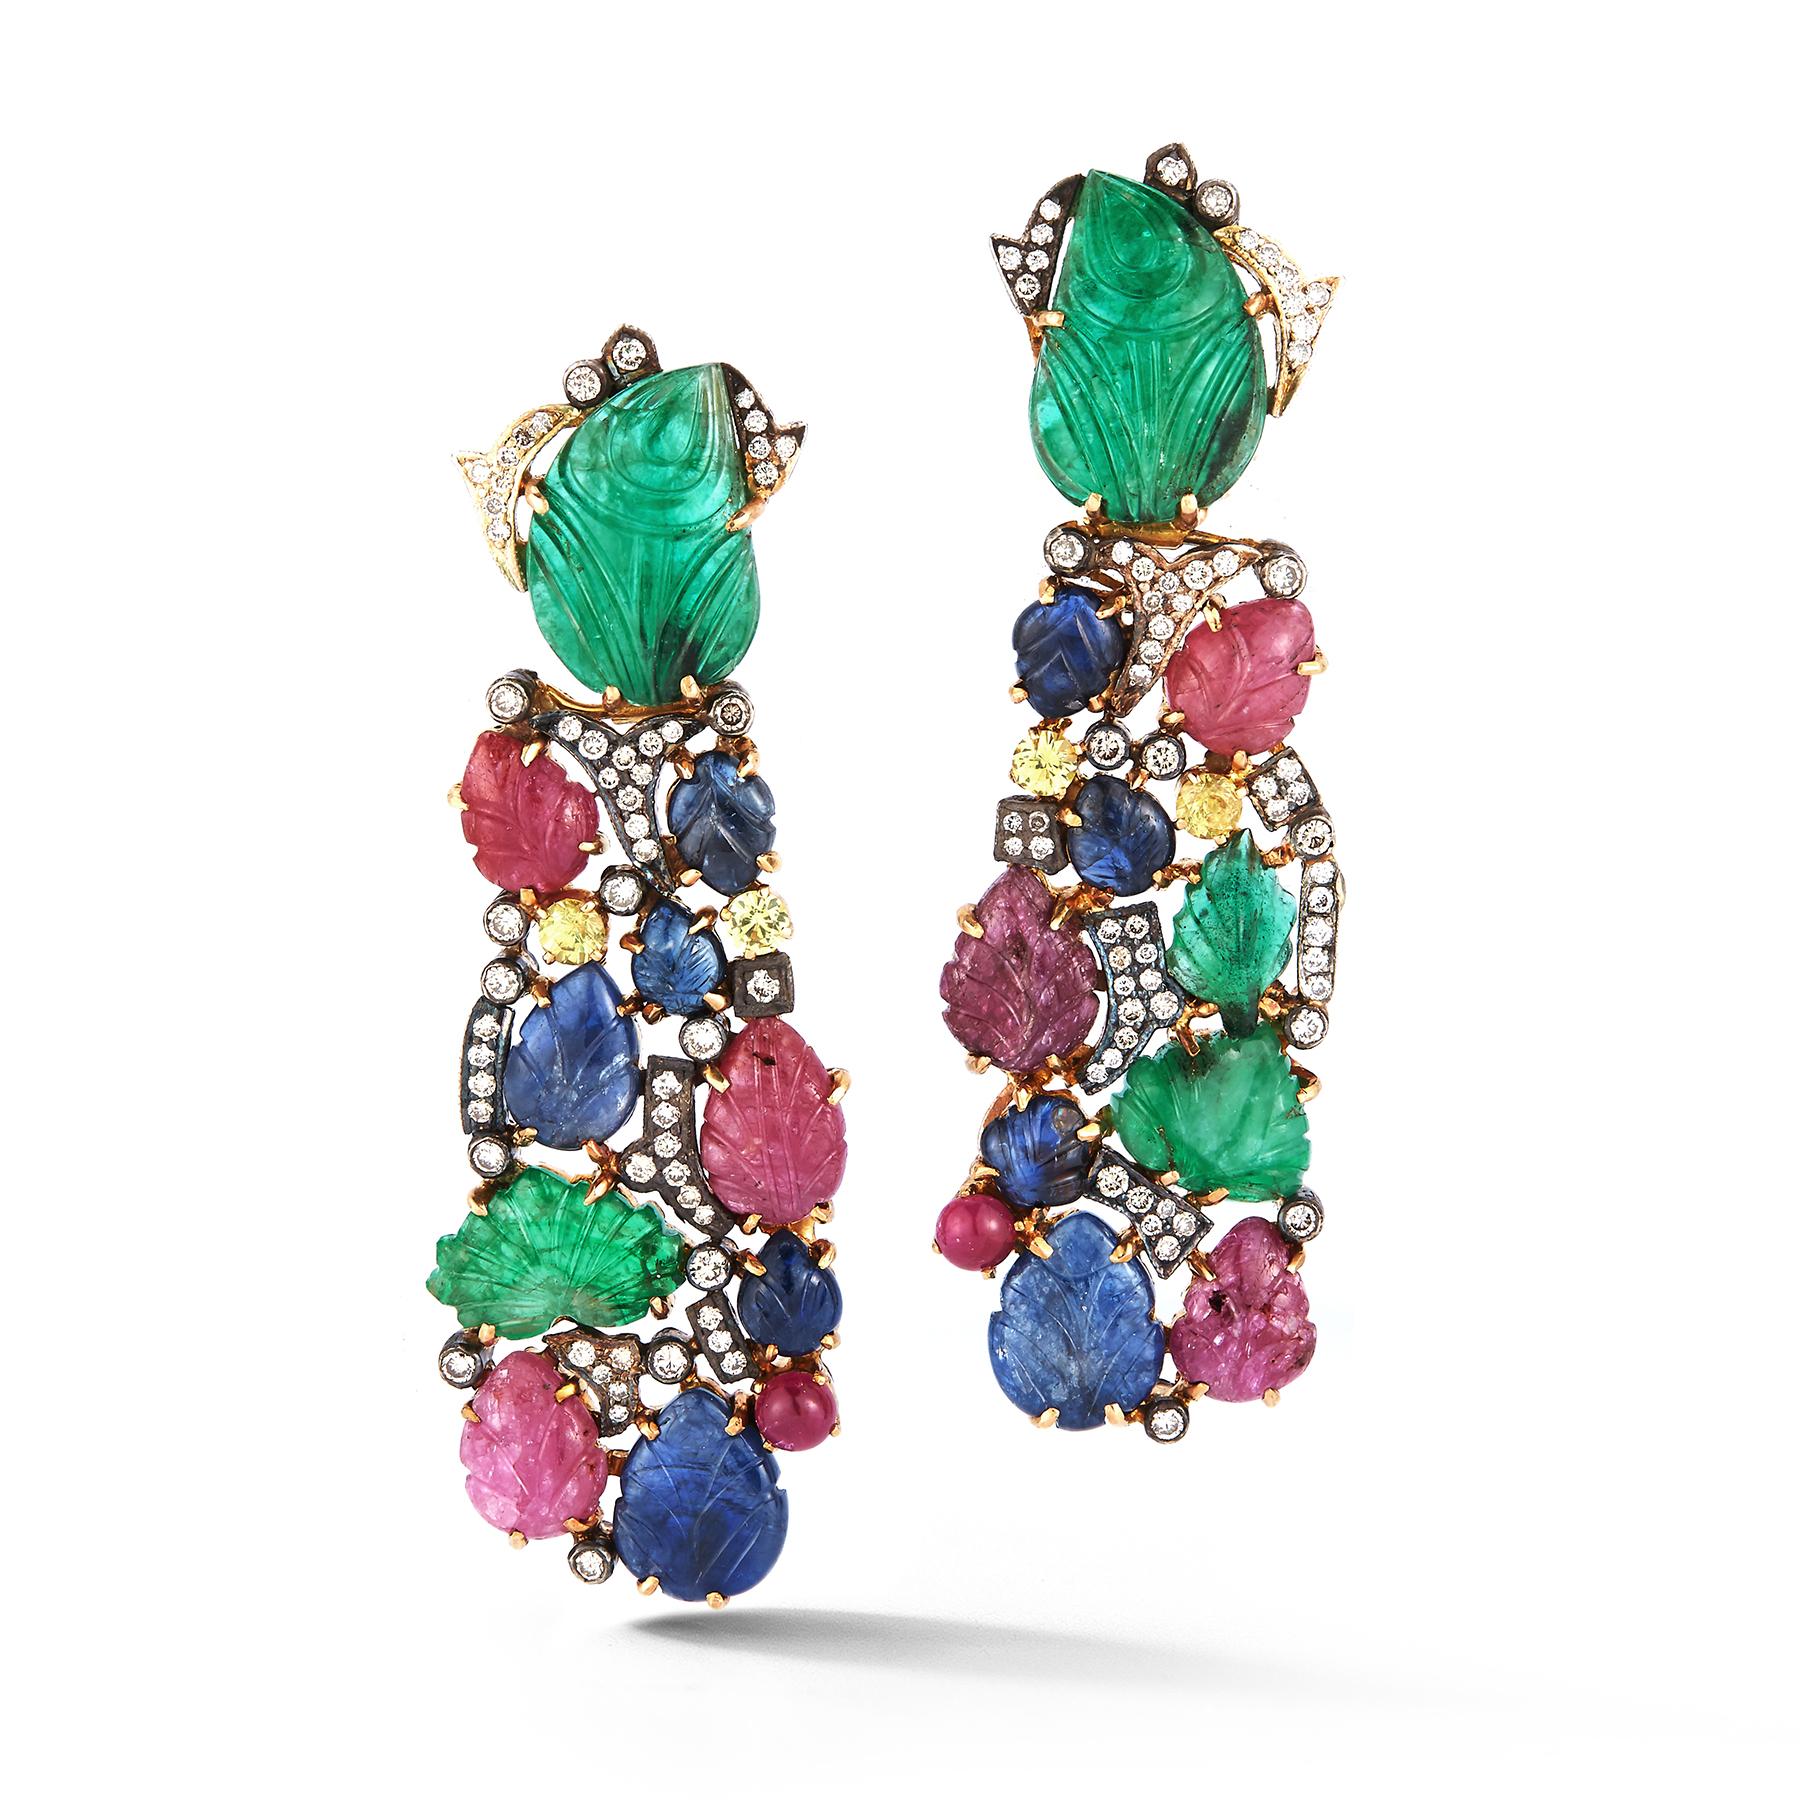 Tutti Frutti Earrings , carved Gem Stone, Diamond Yellow Gold Drop Earrings, Beautifully set Emerald Ruby and Sapphire with encrusted with diamonds in gold setting 
Back Type: Clip On